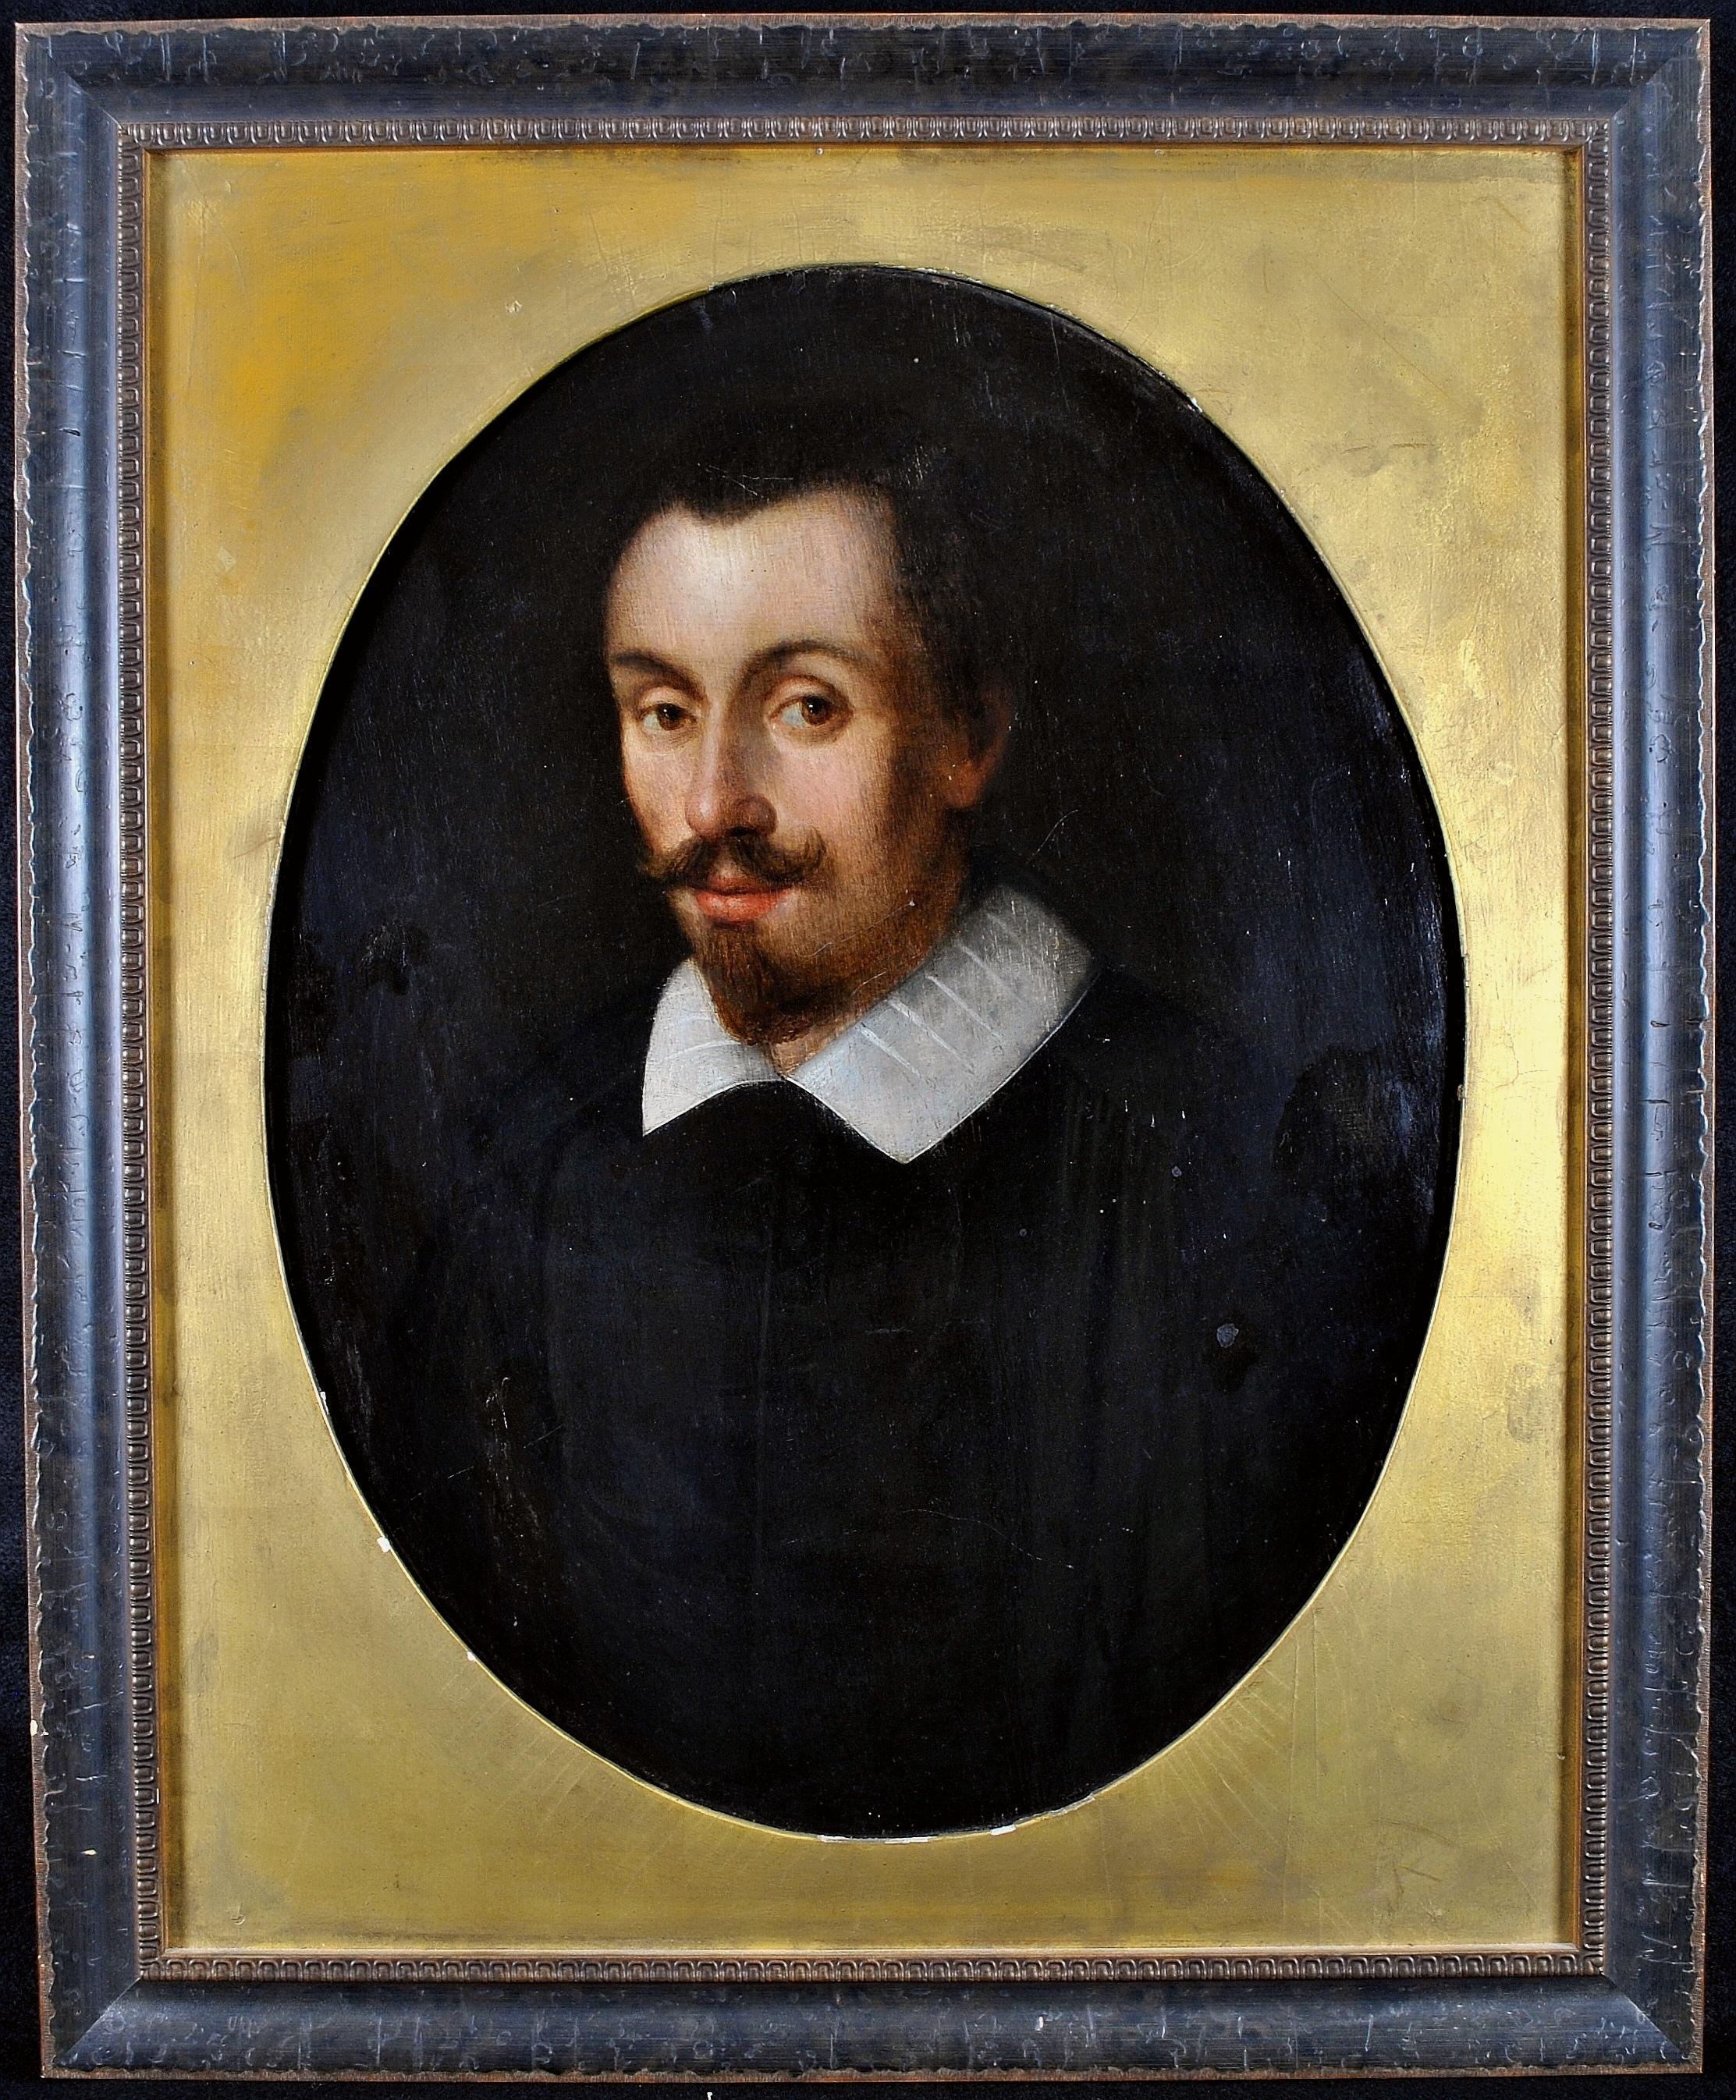 Portrait of a Gentleman - Old Master Oil on Panel Painting - Shakespeare